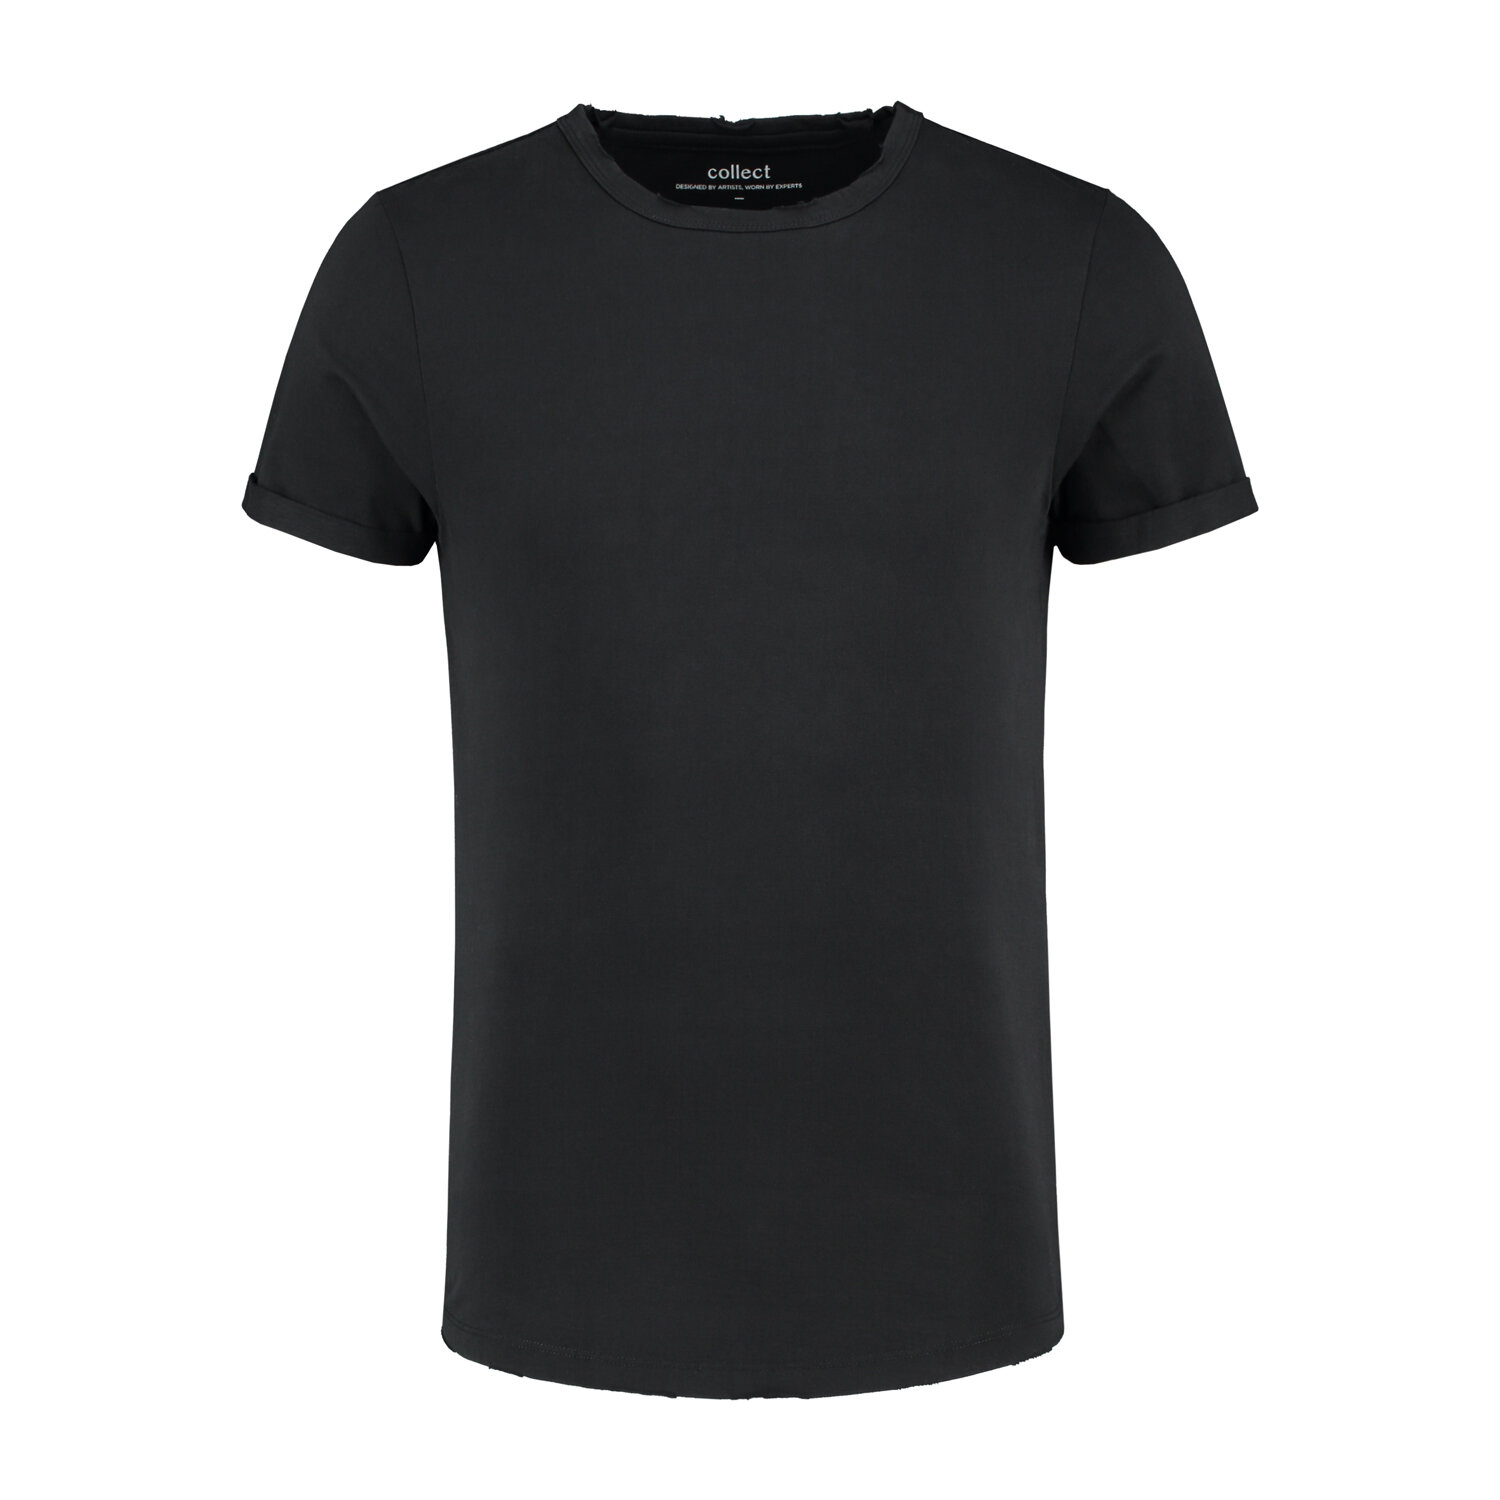 Pray T-shirt Black — Collect The Label - Wearable Works of Art